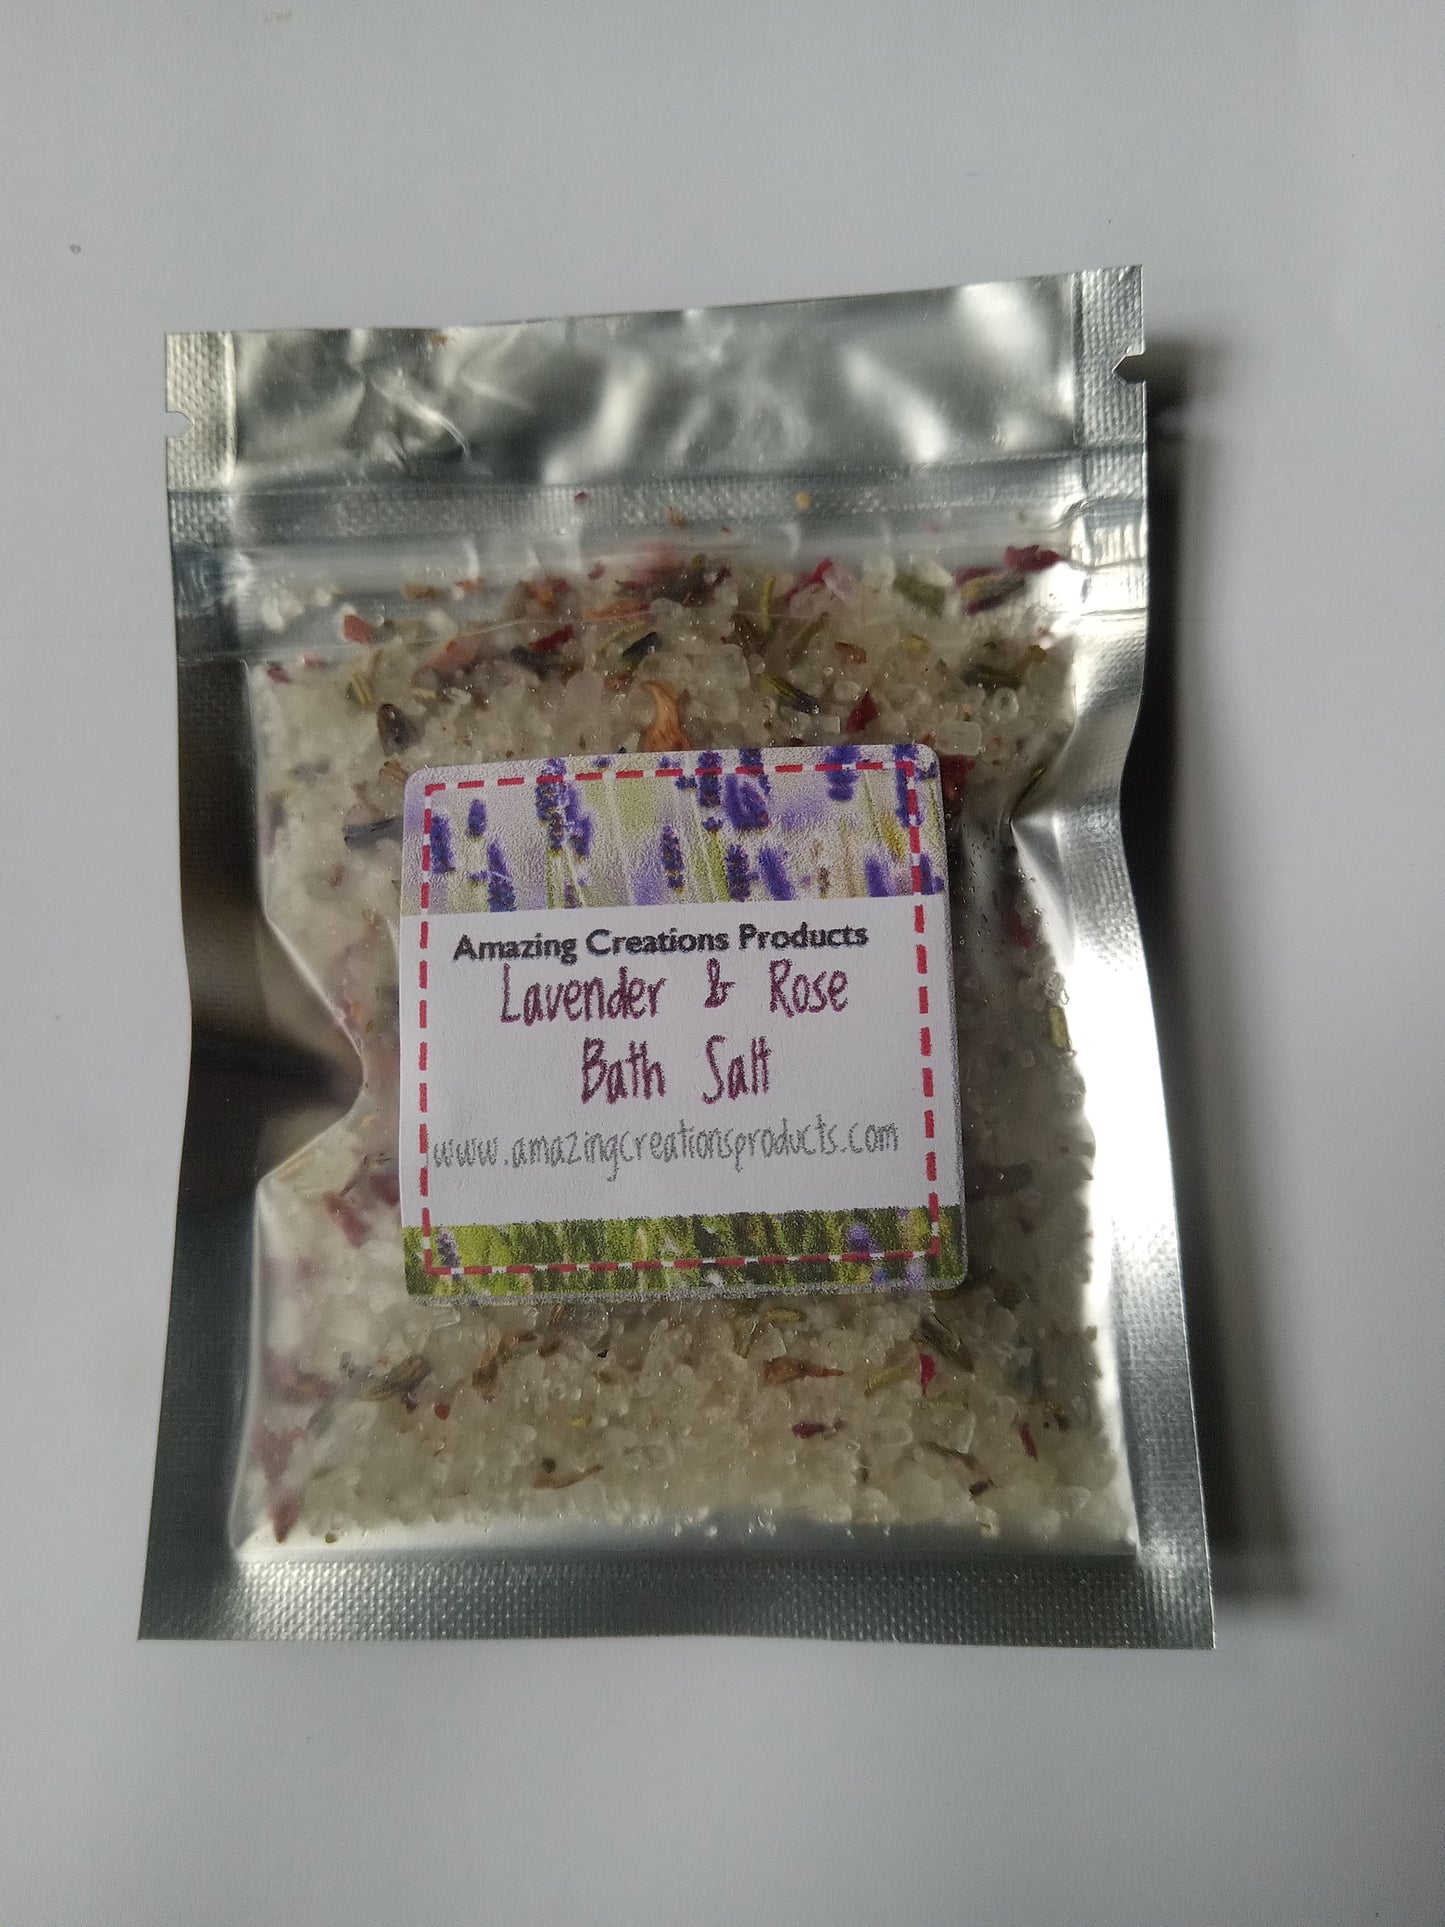  Lavender & Rose Bath Salts -  available at Amazing Creations Products . Grab yours for $10 today!